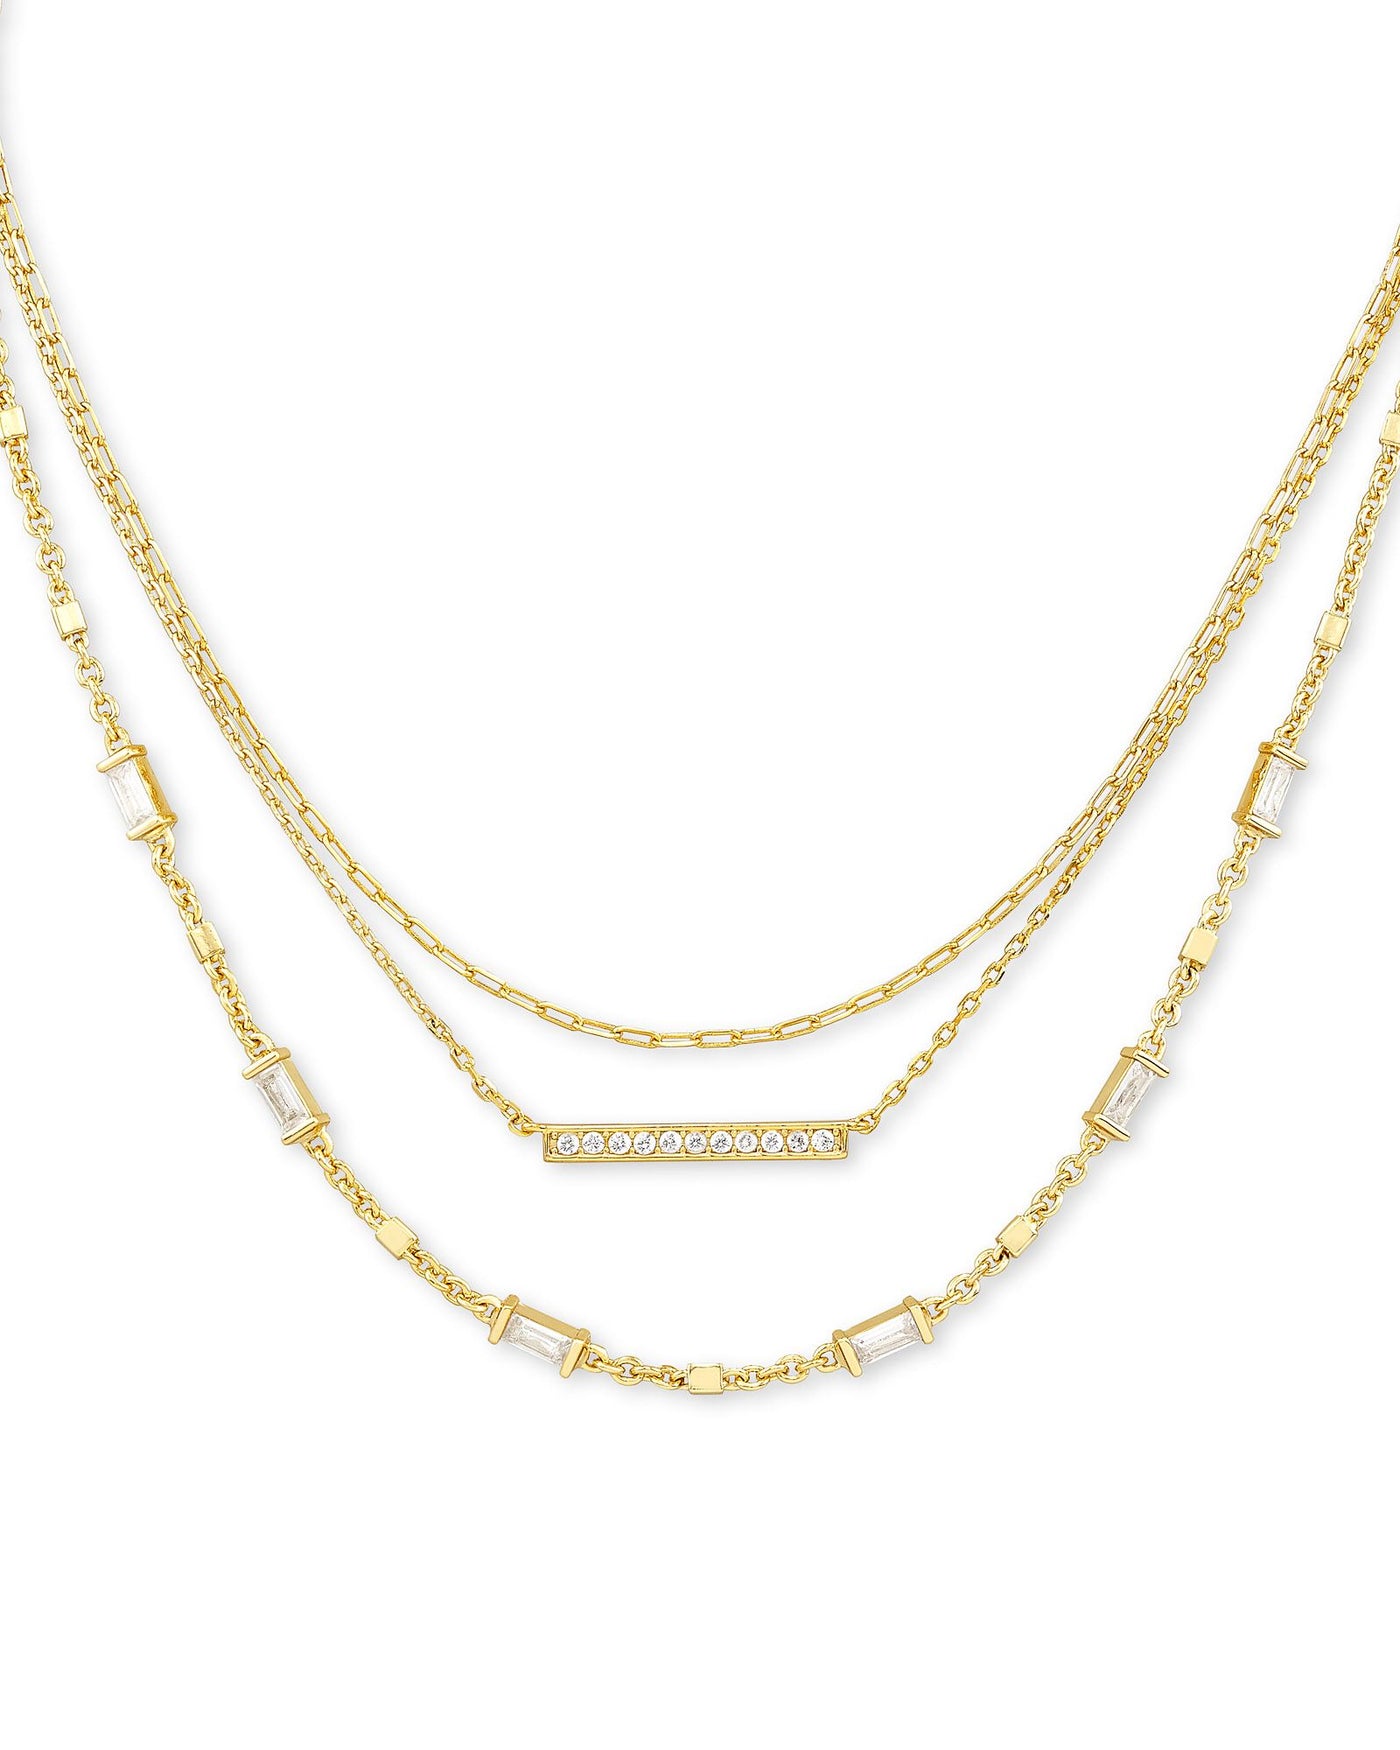 Kendra Scott Addison Triple Strand Necklace in Gold-Necklaces-Kendra Scott-Market Street Nest, Fashionable Clothing, Shoes and Home Décor Located in Mabank, TX